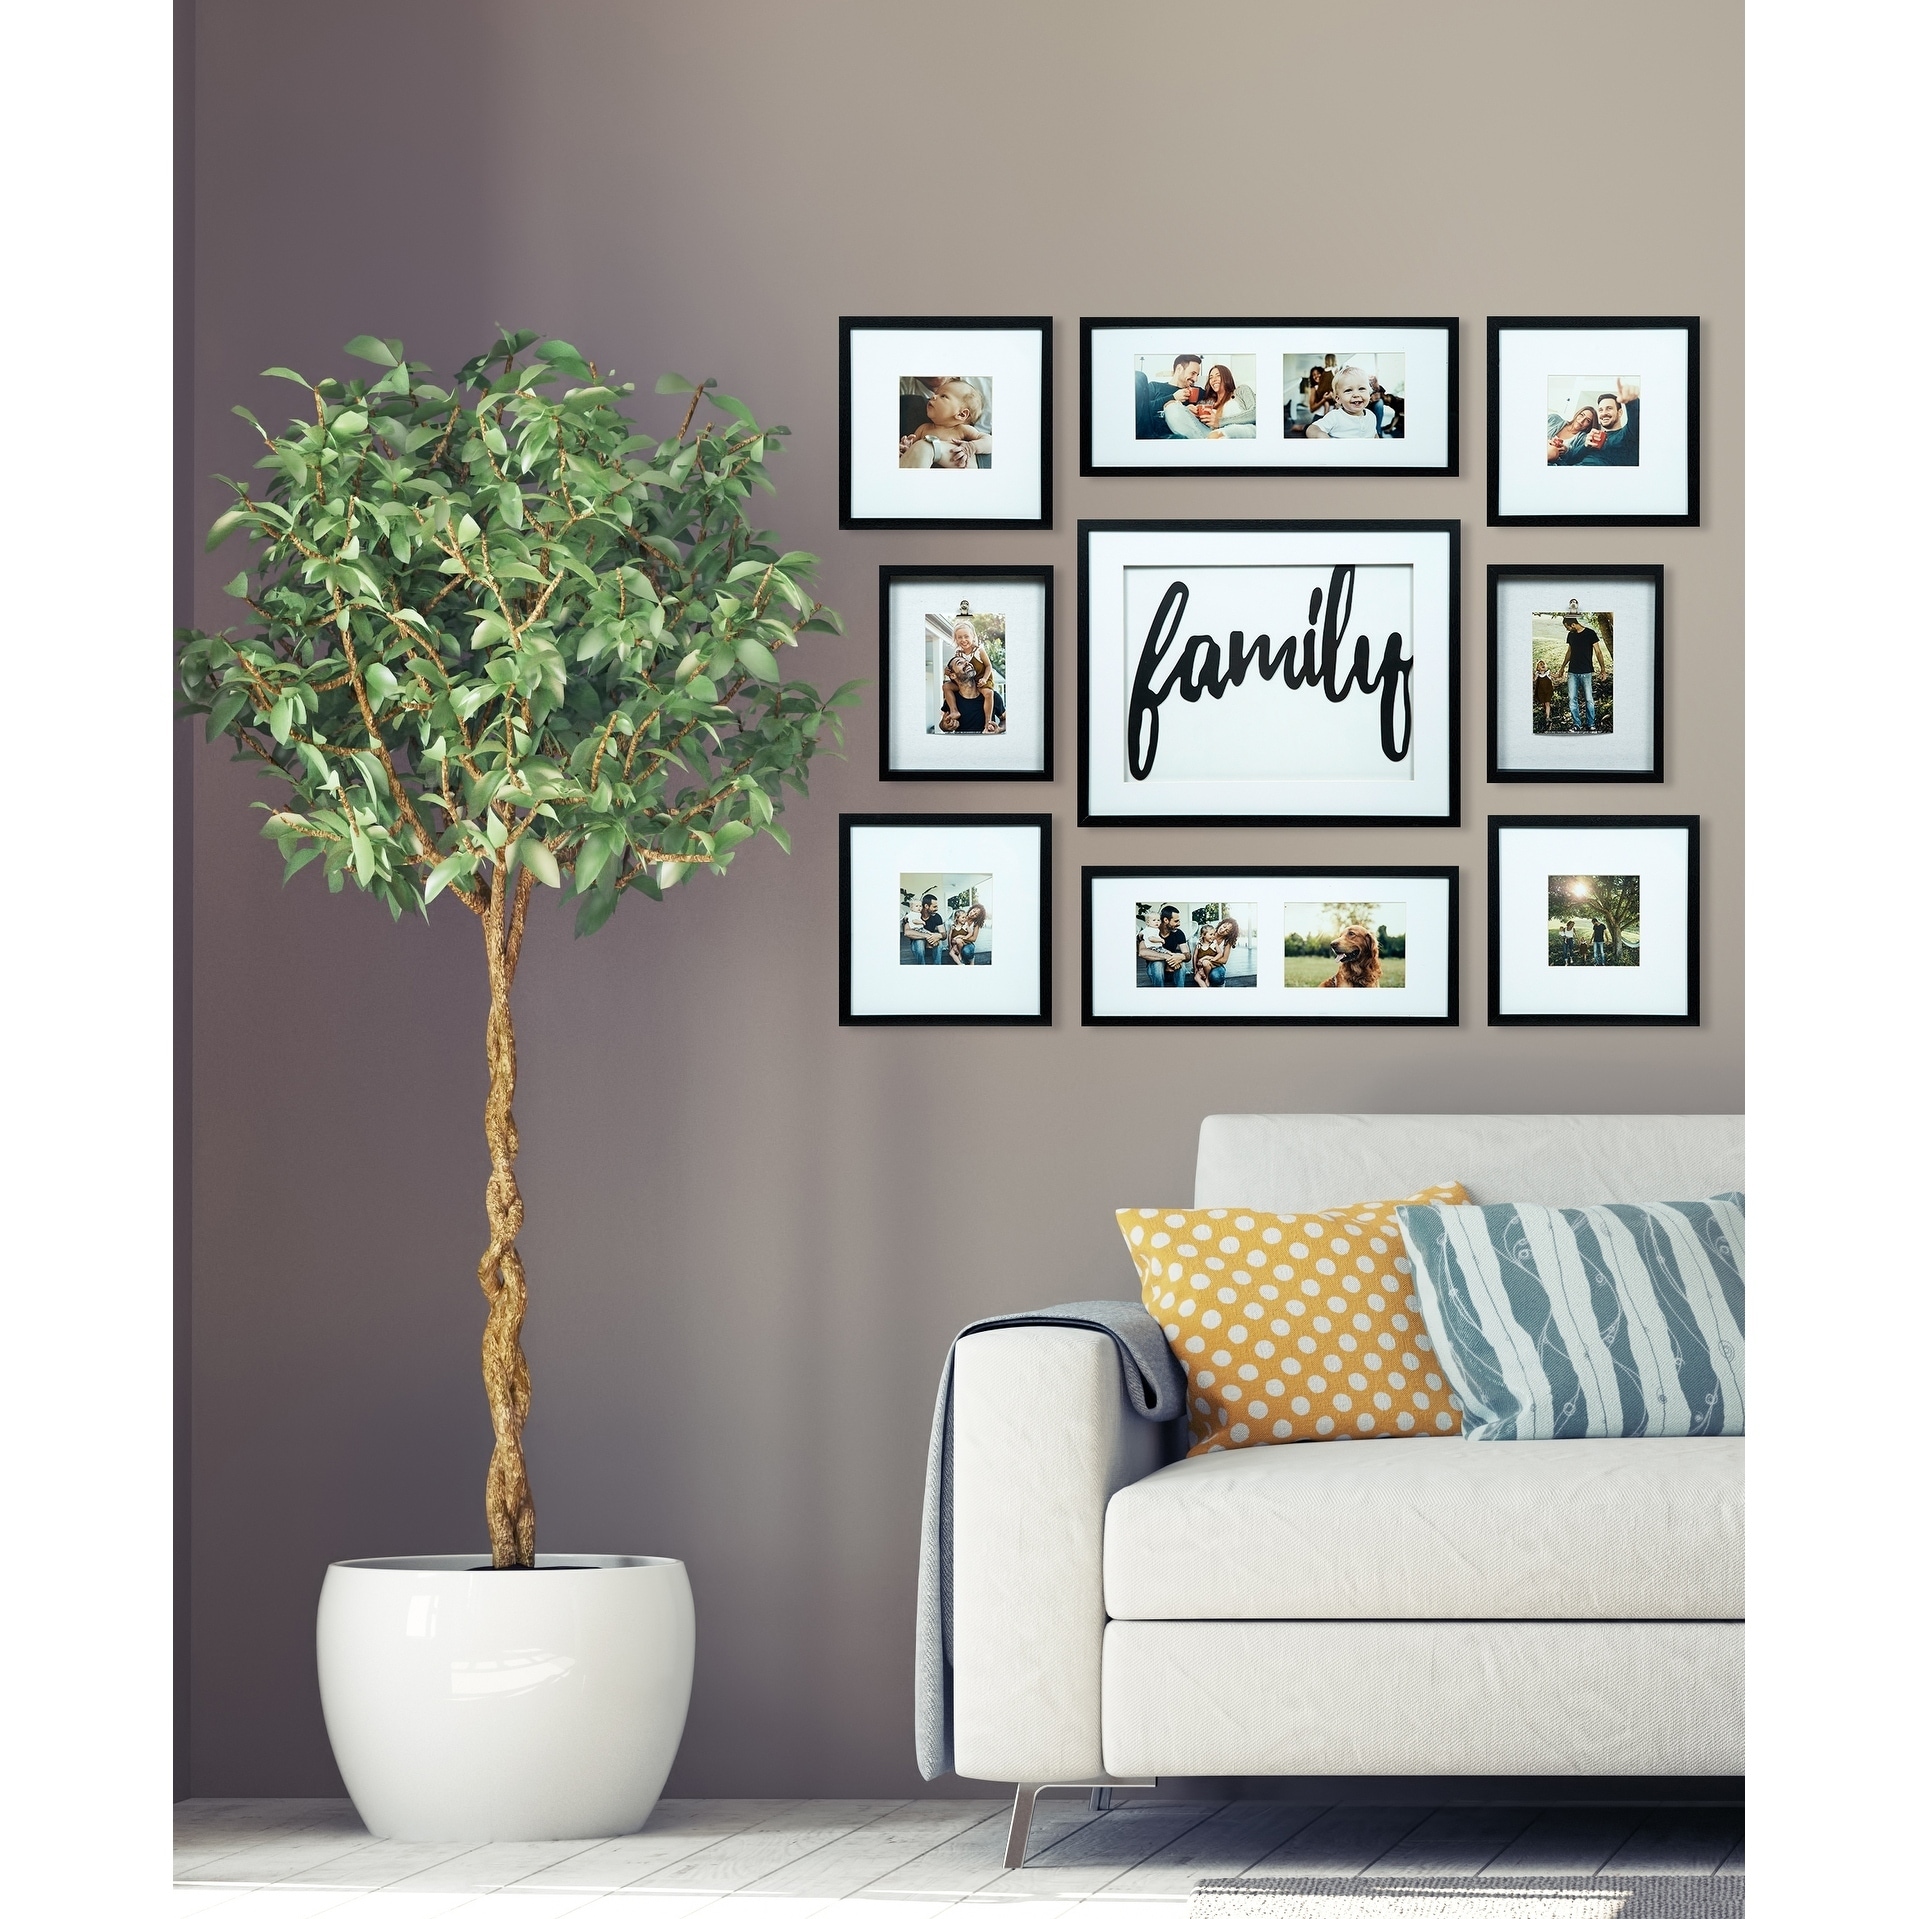 https://ak1.ostkcdn.com/images/products/18126679/9-Piece-Family-Decor-Black-Collage-Kit-Picture-Frame-2472c4cc-1cf3-4dcd-ac47-a04be92b6726.jpg